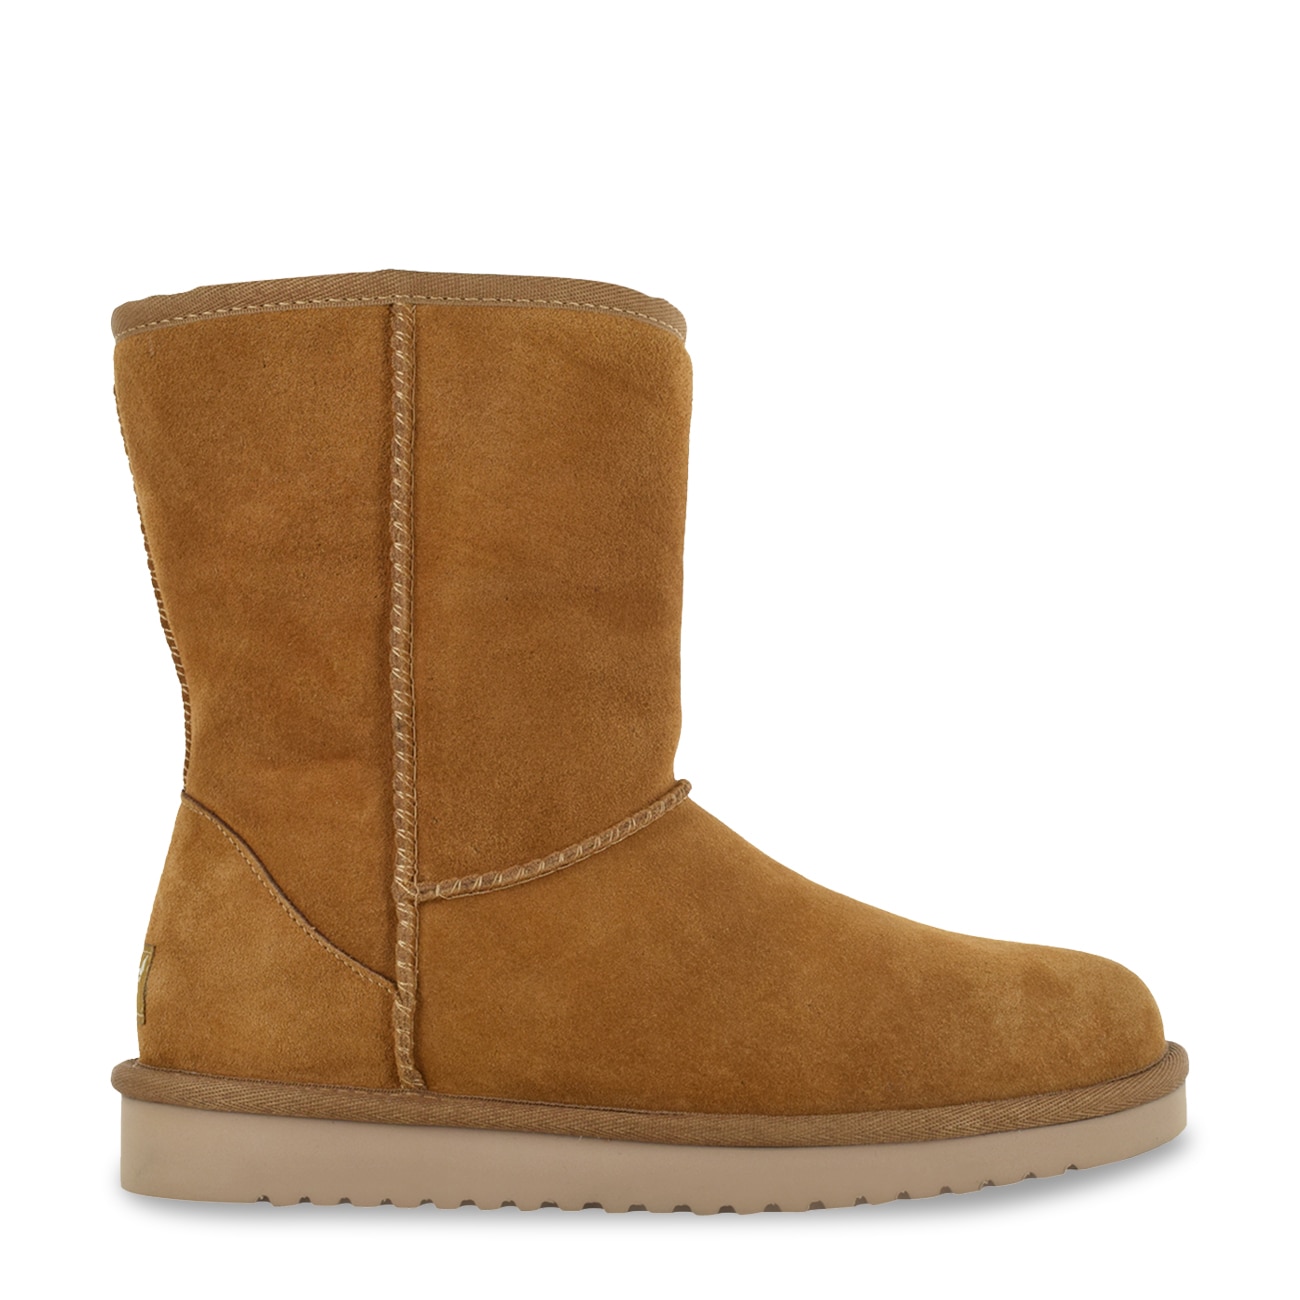 cheapest place to buy uggs